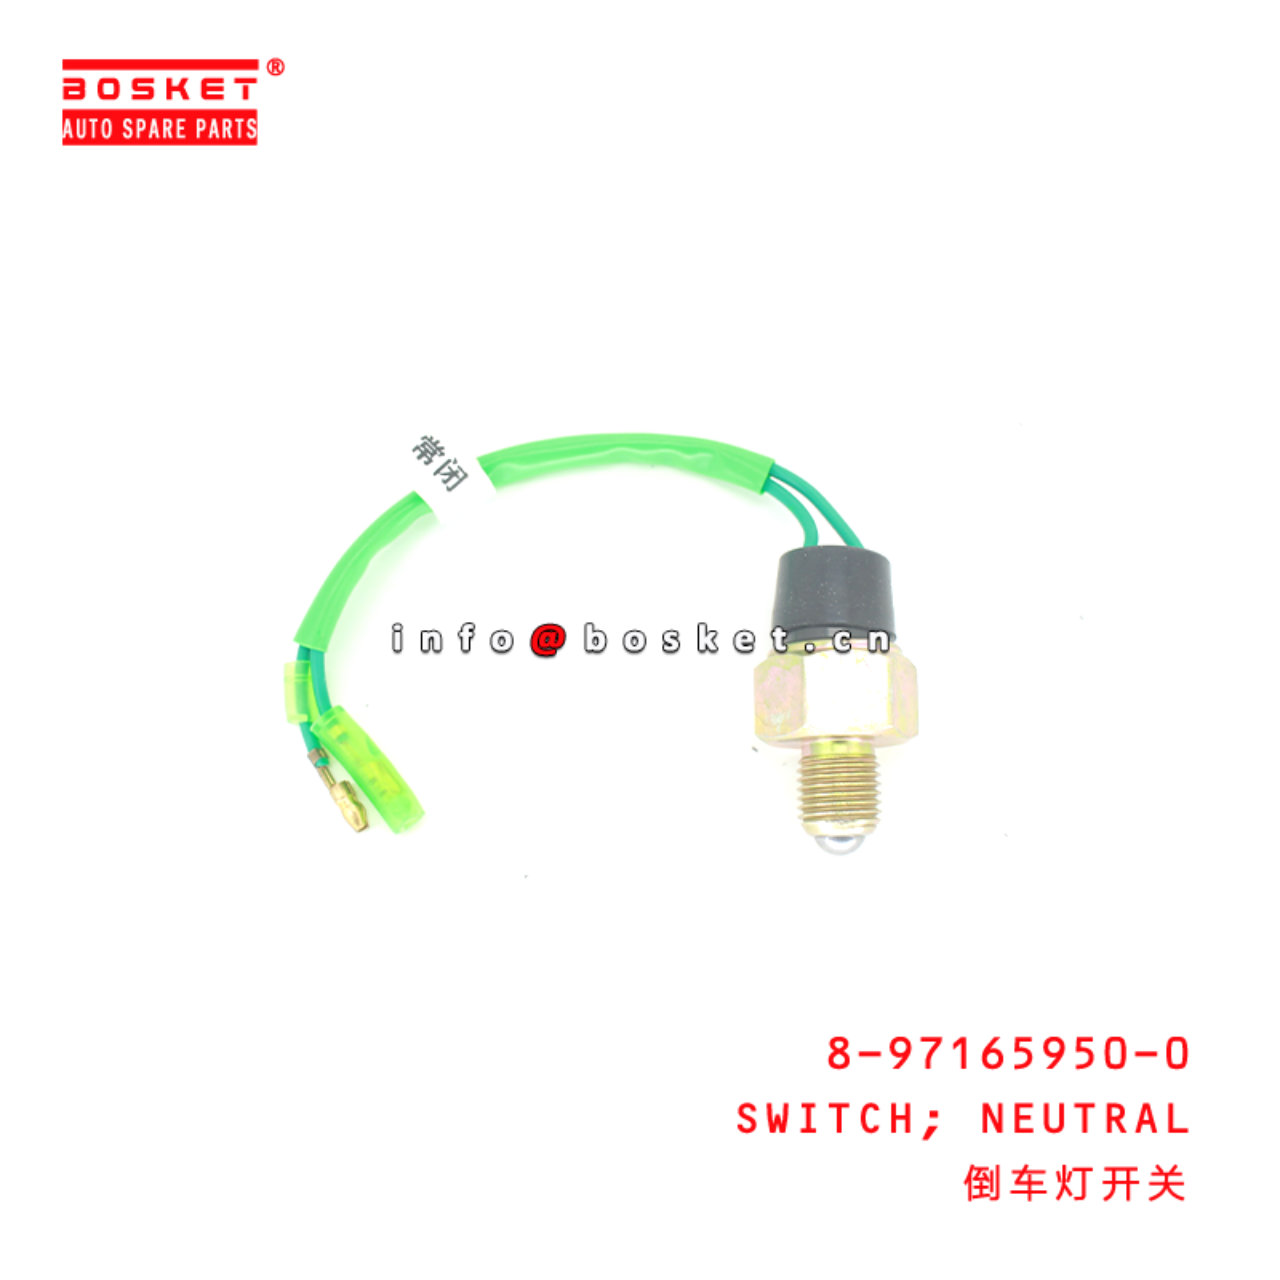 8-97165950-0 Neutral Switch Suitable for ISUZU NKR 4JB1 8971659500